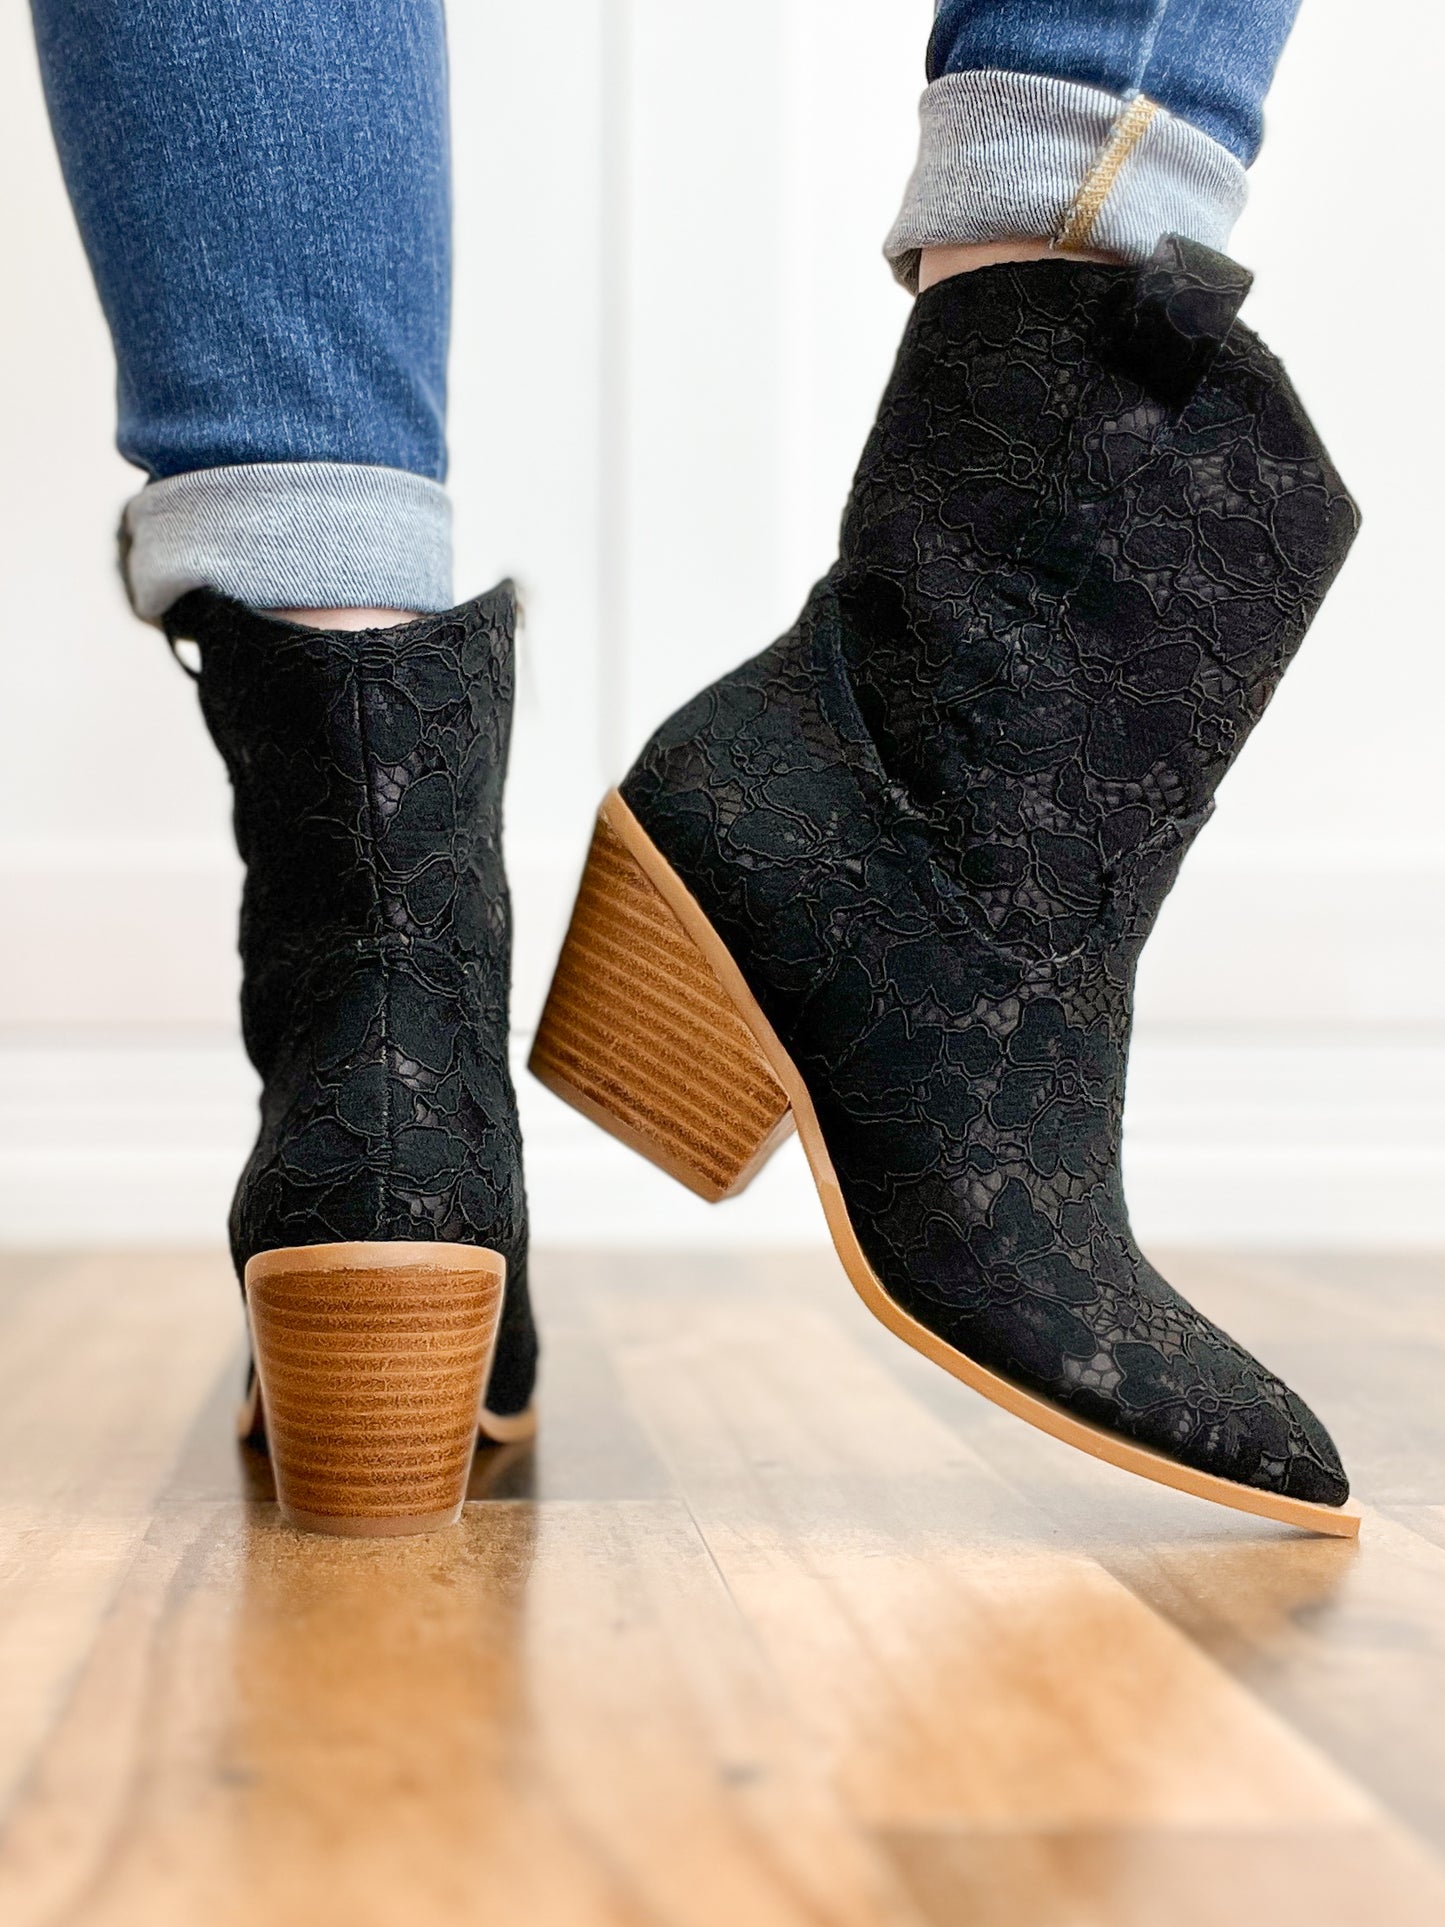 Corkys Rowdy Booties in Black Lace